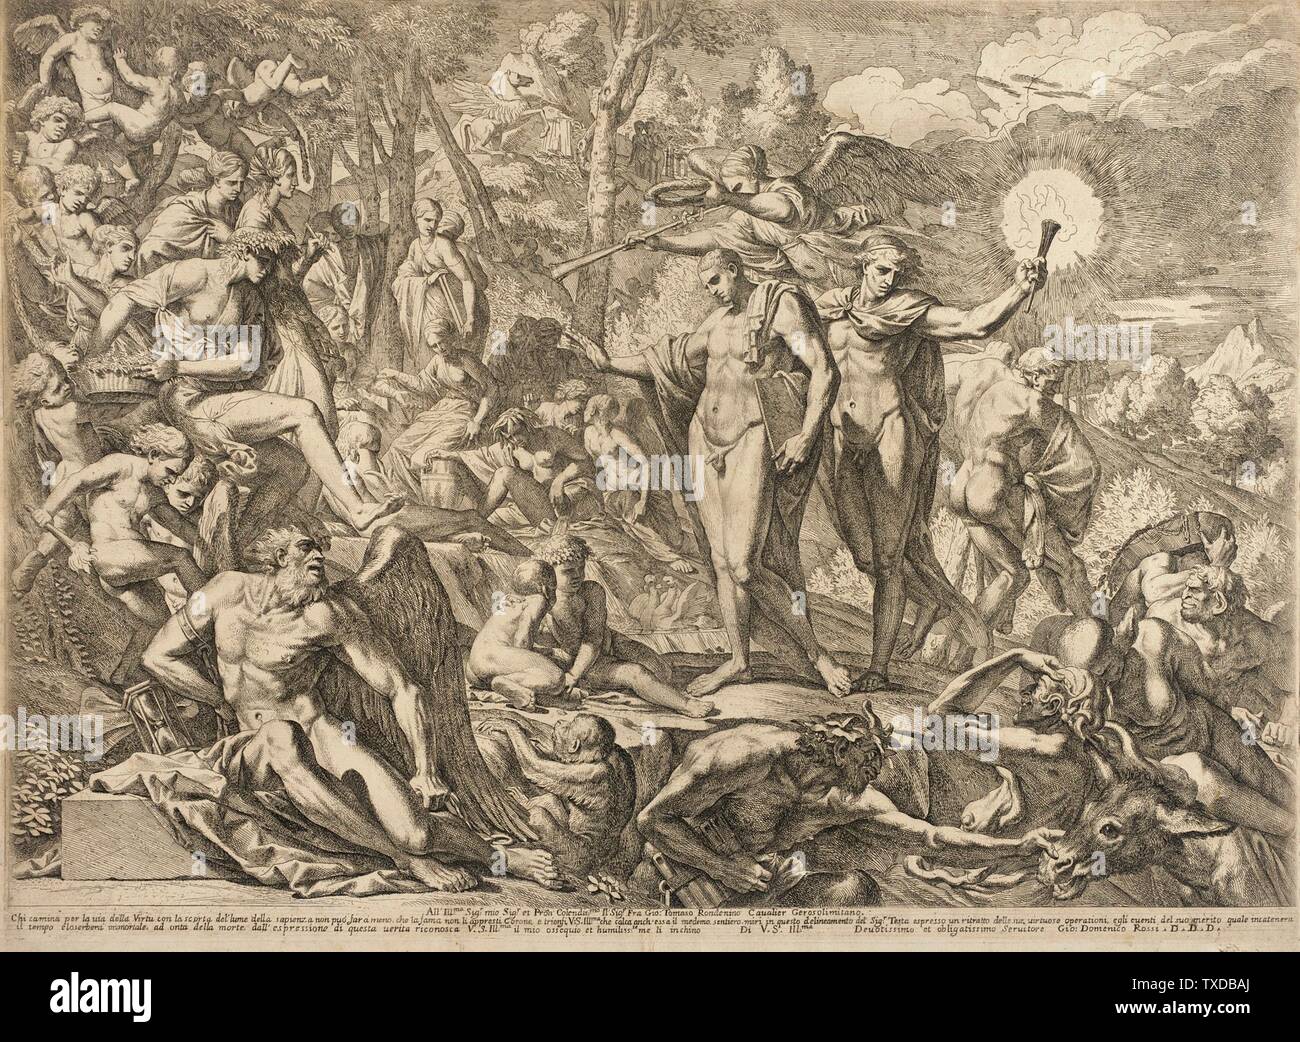 The Triumph of the Virtuous Artist on Parnassus;  Italy, circa 1644-1646 Prints; etchings Etching Image and sheet:  17 x 23 in. (43.18 x 58.42 cm); Mat:  22 x 27 5/8 in. (55.88 x 70.17 cm) Graphic Arts Council Fund (M.2002.135) Prints and Drawings; between circa 1644 and circa 1646 date QS:P571,+1644-00-00T00:00:00Z/8,P1319,+1644-00-00T00:00:00Z/9,P1326,+1646-00-00T00:00:00Z/9,P1480,Q5727902; Stock Photo